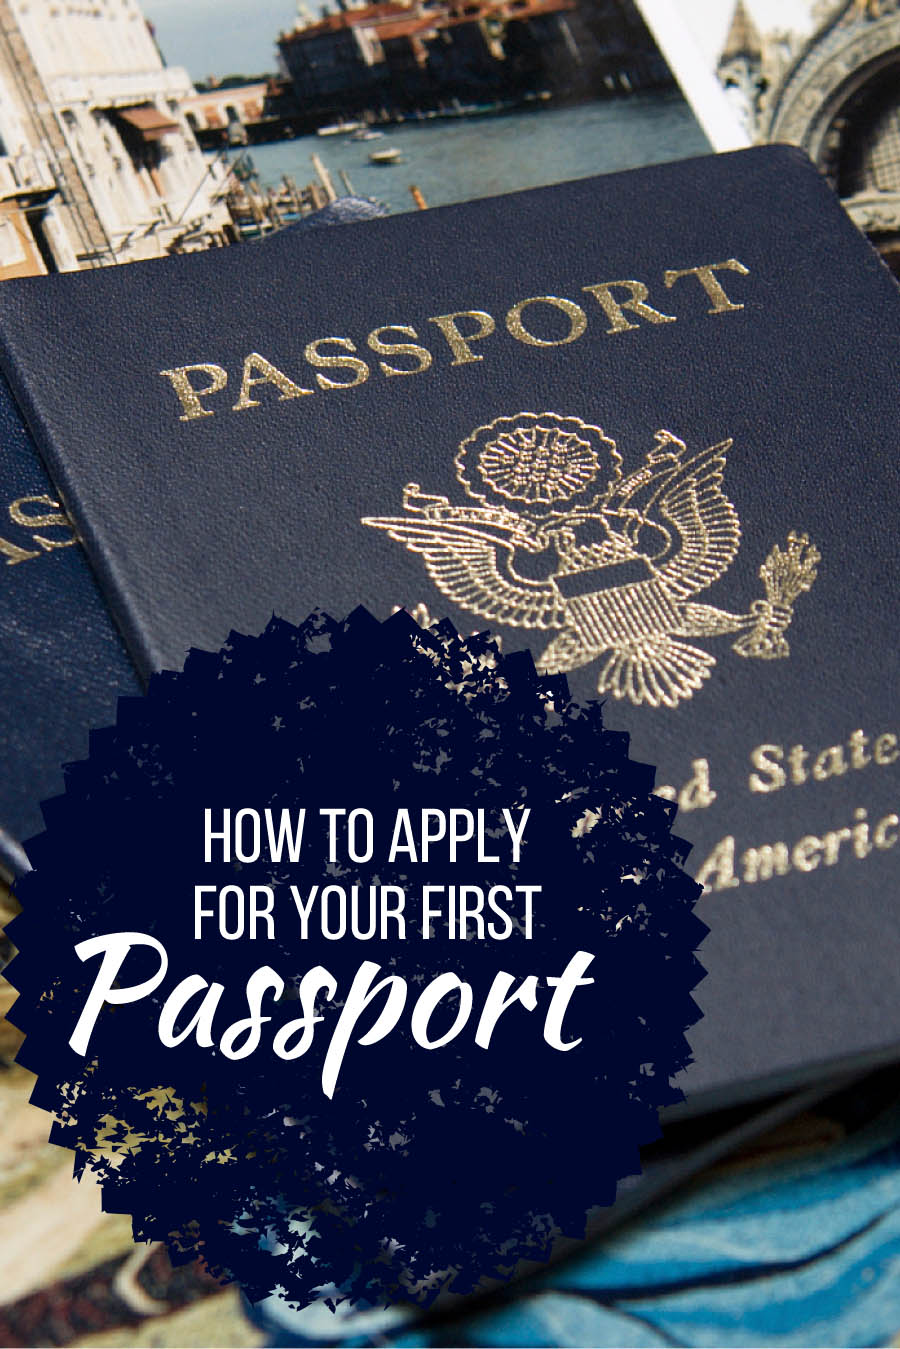 How to Apply for Your First Passport